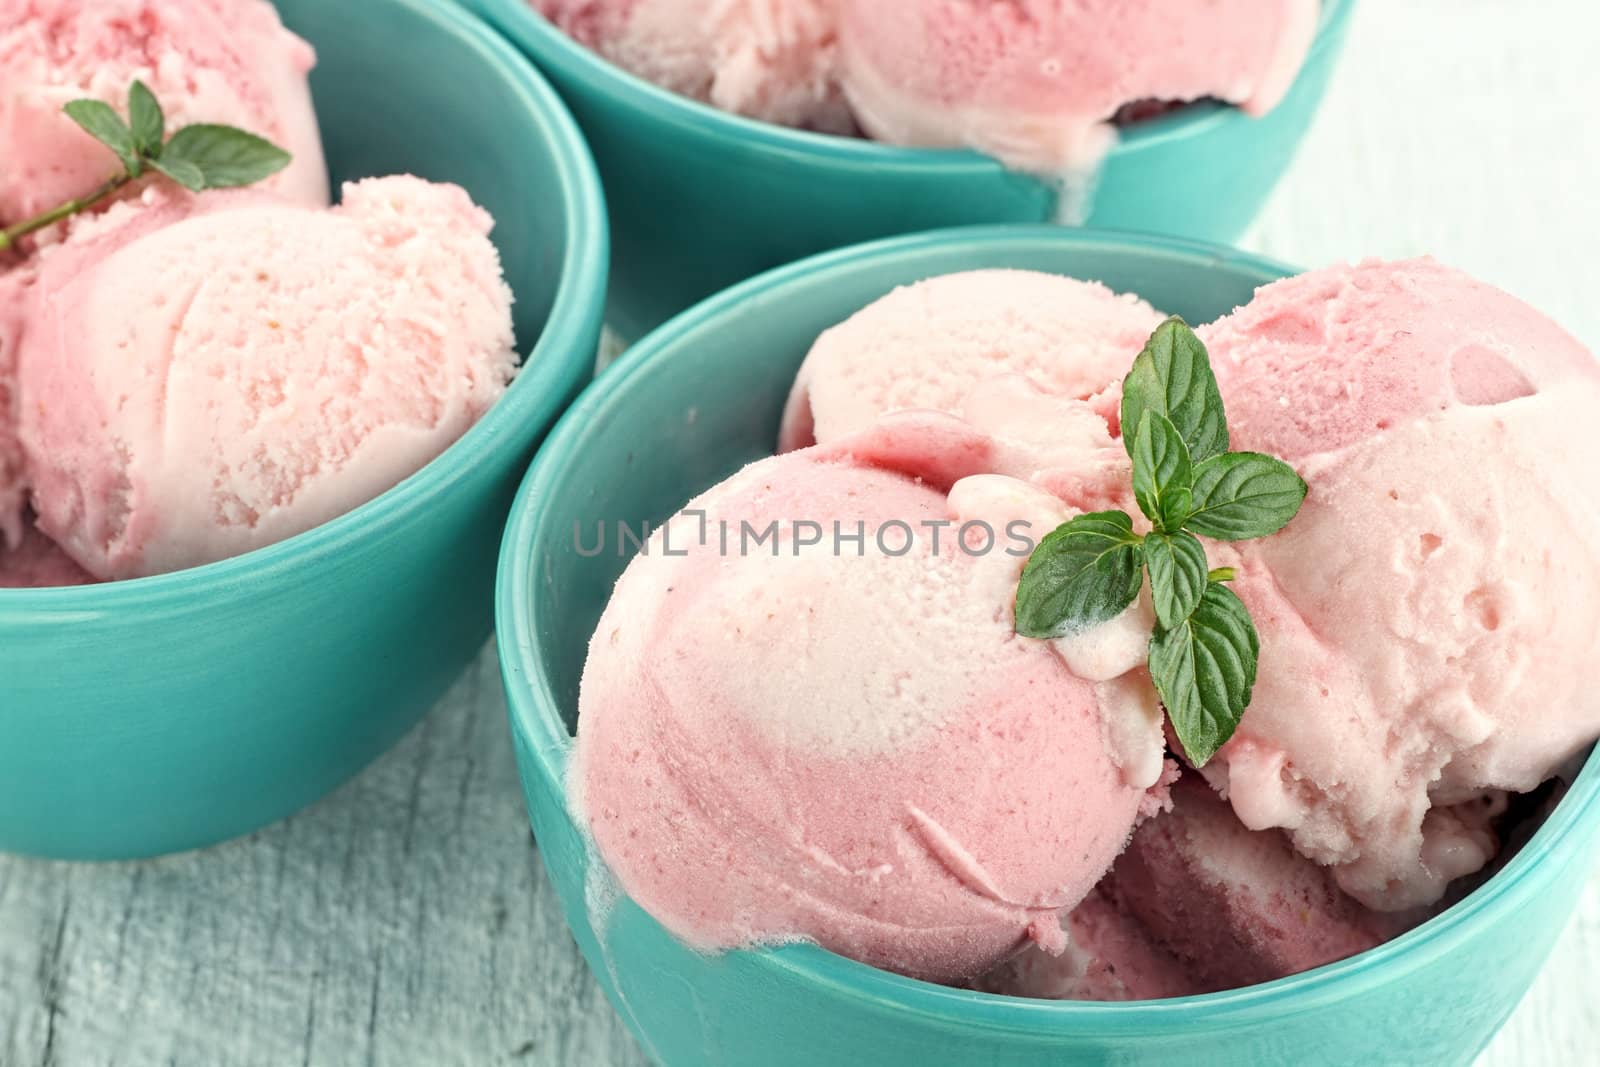 Three bowls of strawberry or raspberry sorbet, garnished with fresh mint.
